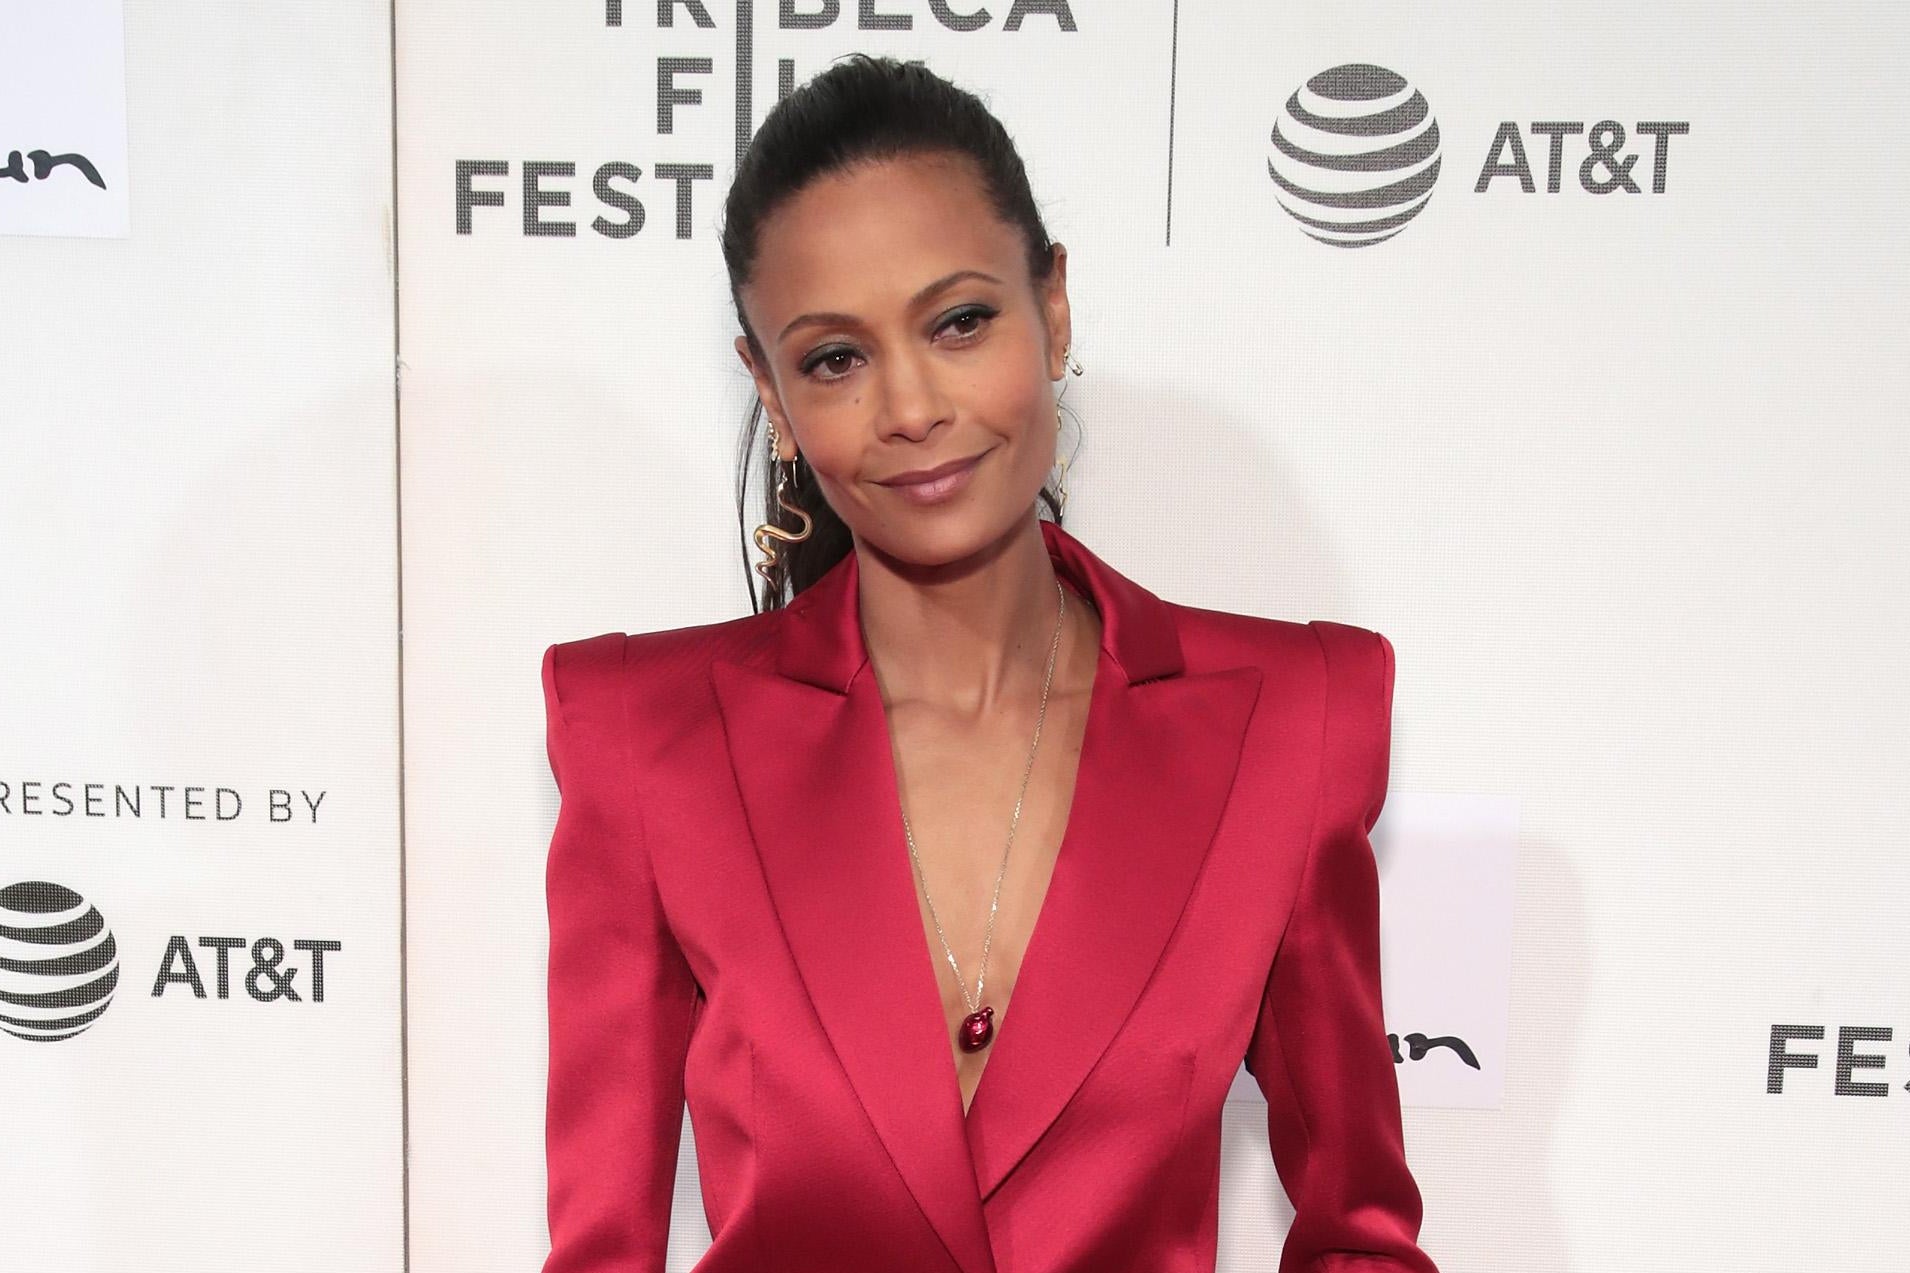 Thandie Newton attends the premiere of Westworld during the 2018 Tribeca Film Festival at BMCC Tribeca PAC on April 19, 2018 in New York City.